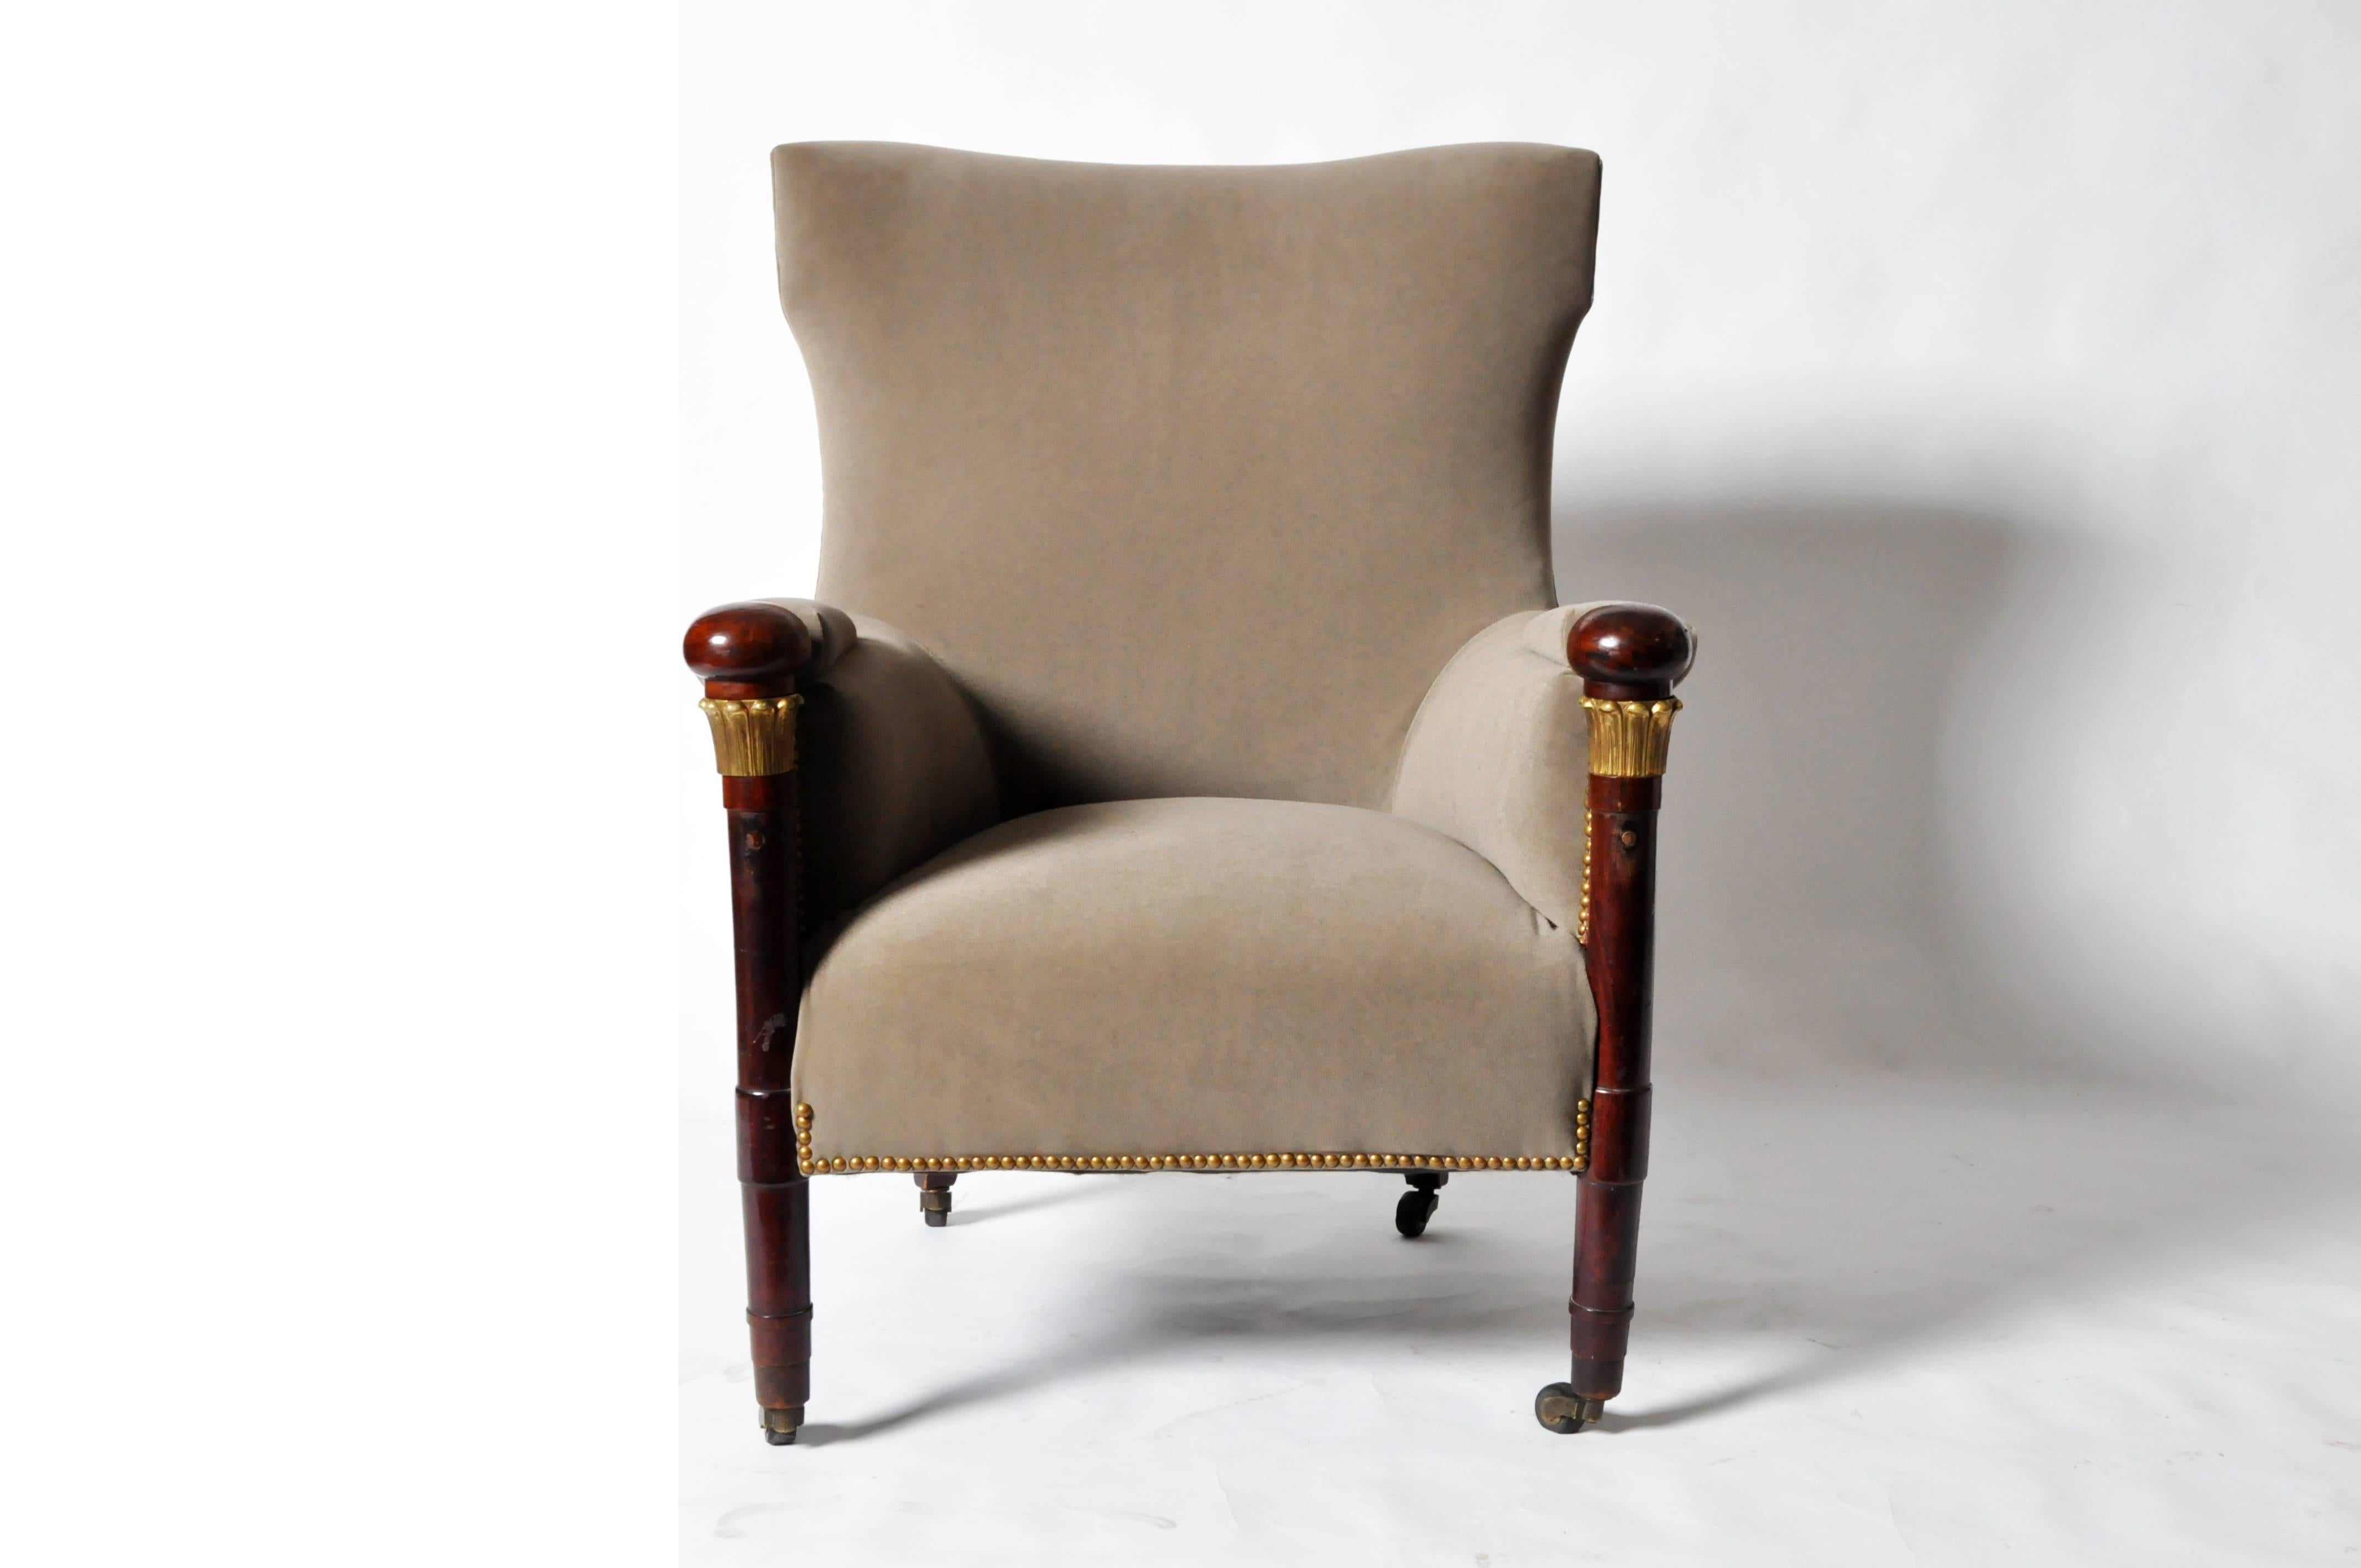 This comfortable chair features a pair of column-form front legs raised on casters; each has a decorative acanthus capital-like band below the ball top.